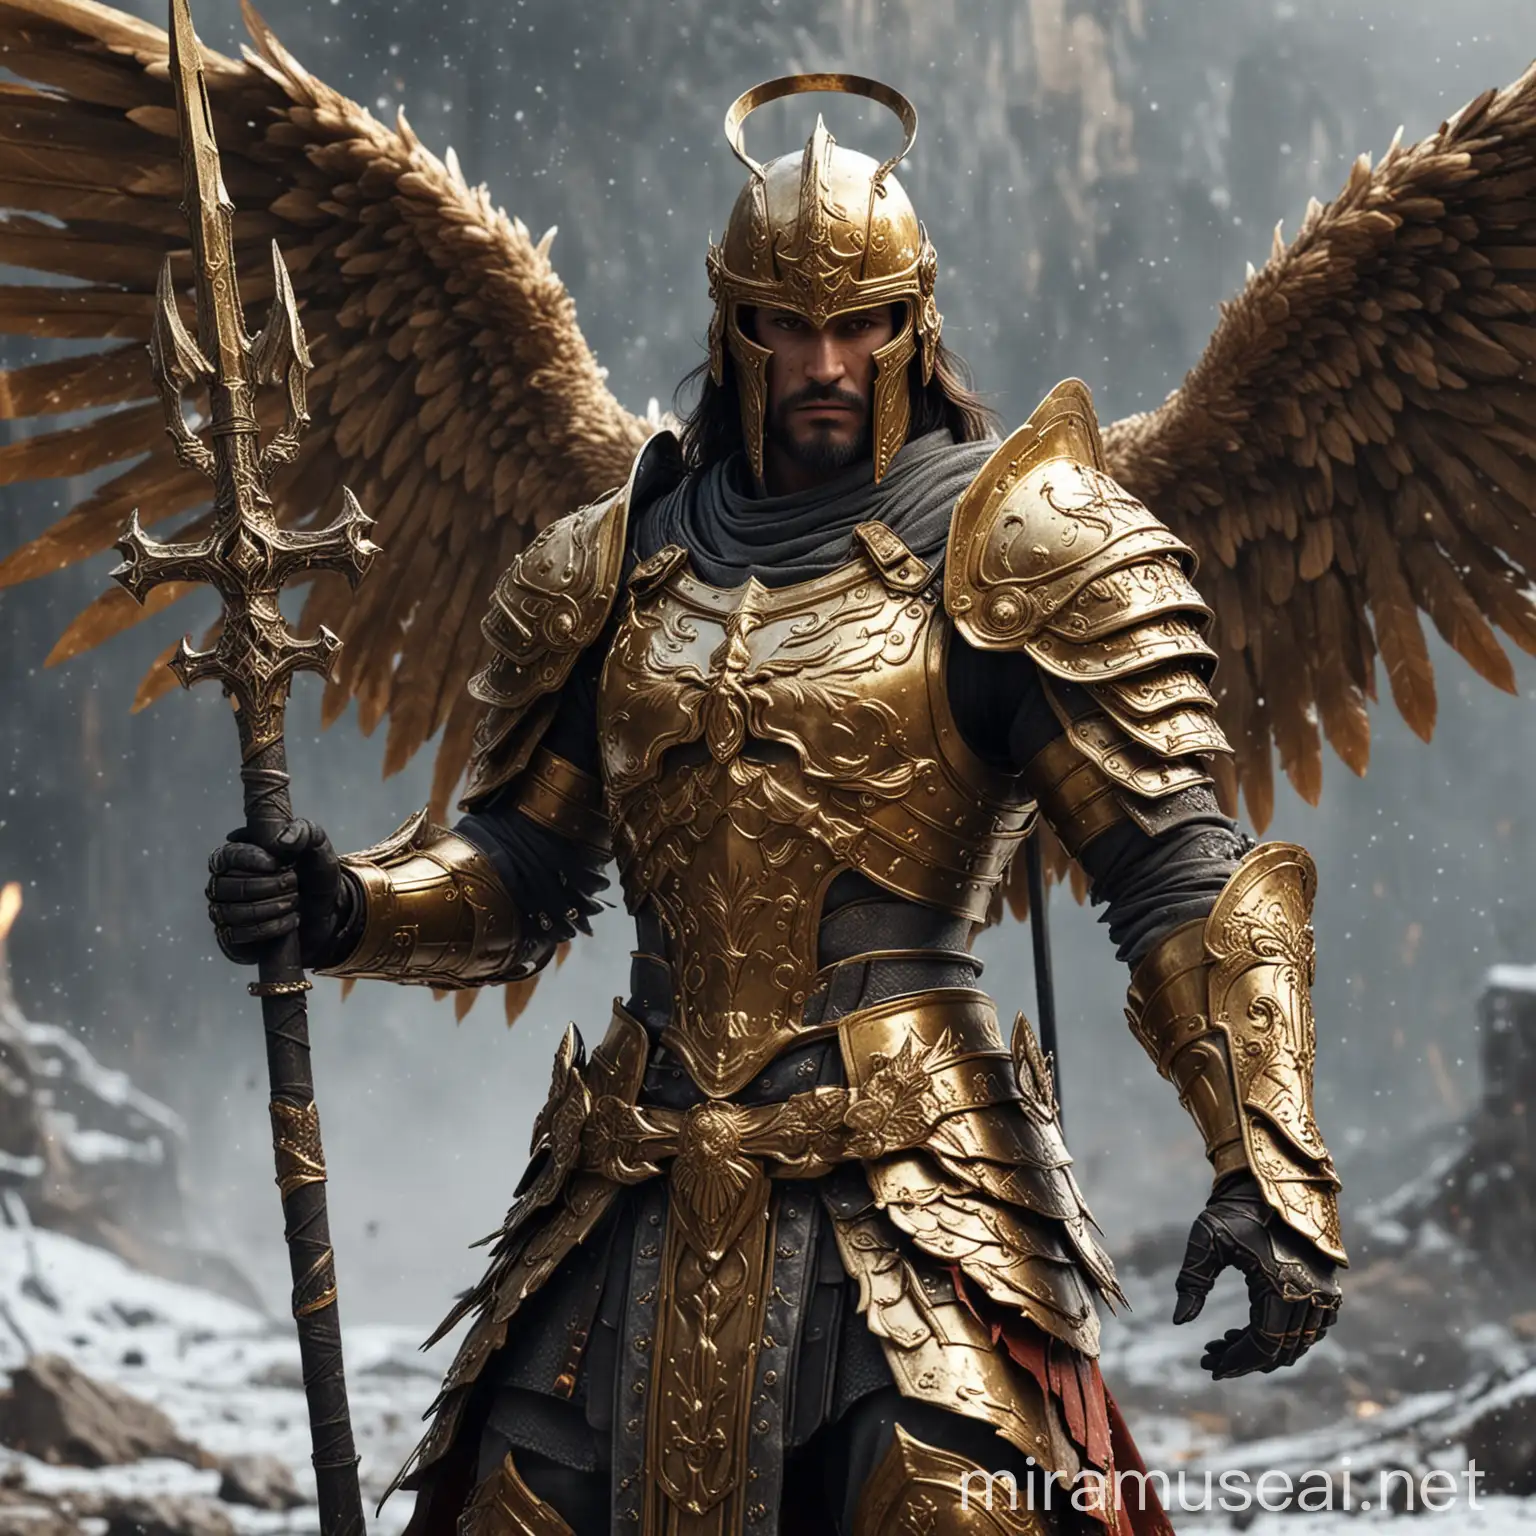 Angel as holy warrior with gold armor,wing.,High-definition,Ultra Realisctic,8K,Cool colors.He holds holy spear.Jesus symbols to armor.Add War background ,ground is snow and blood.He has angel armor with cross design and cross,samurai helmet.Realistic,detailed.He is in hell battlefield zone .Ground is mud